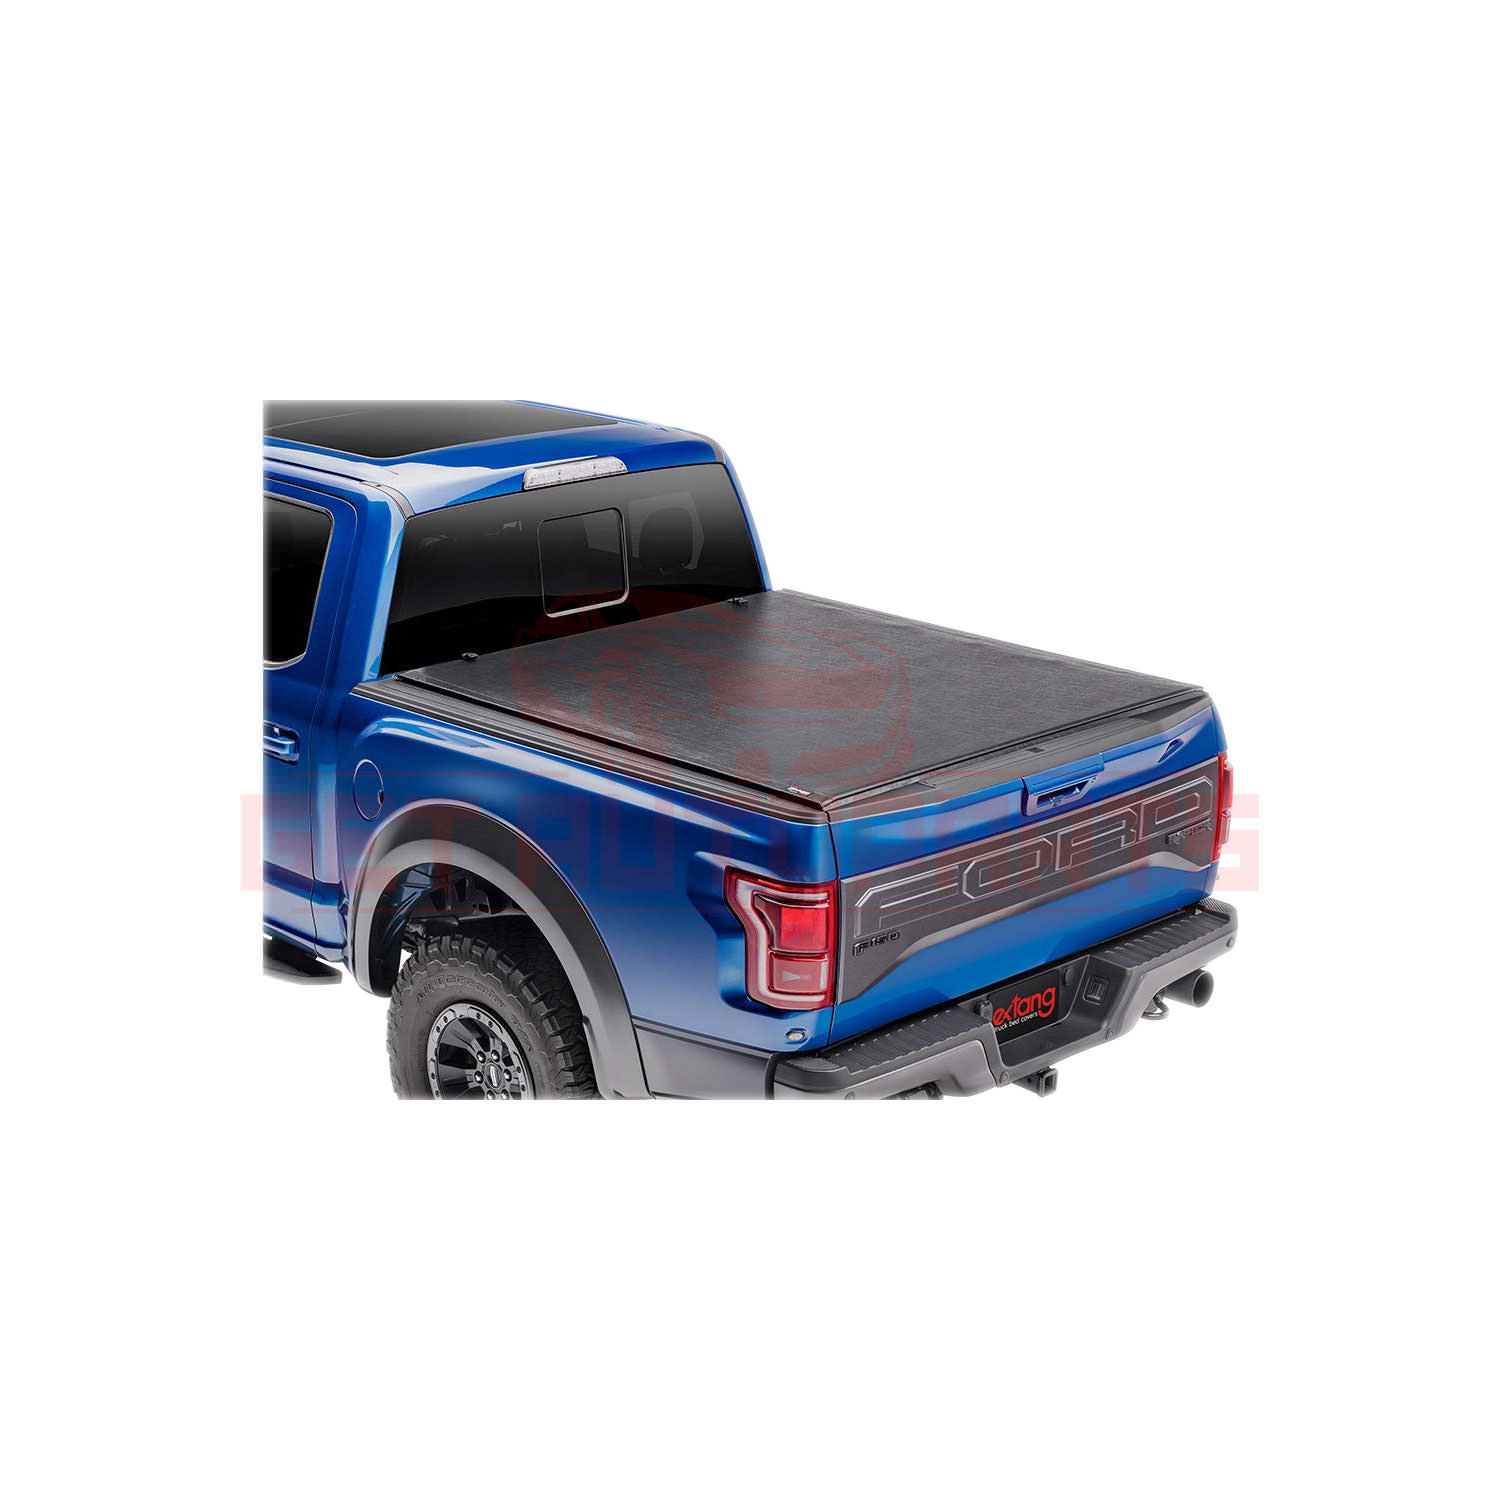 Extang Tonneau Cover Black for Ford F150 20152020 eBay